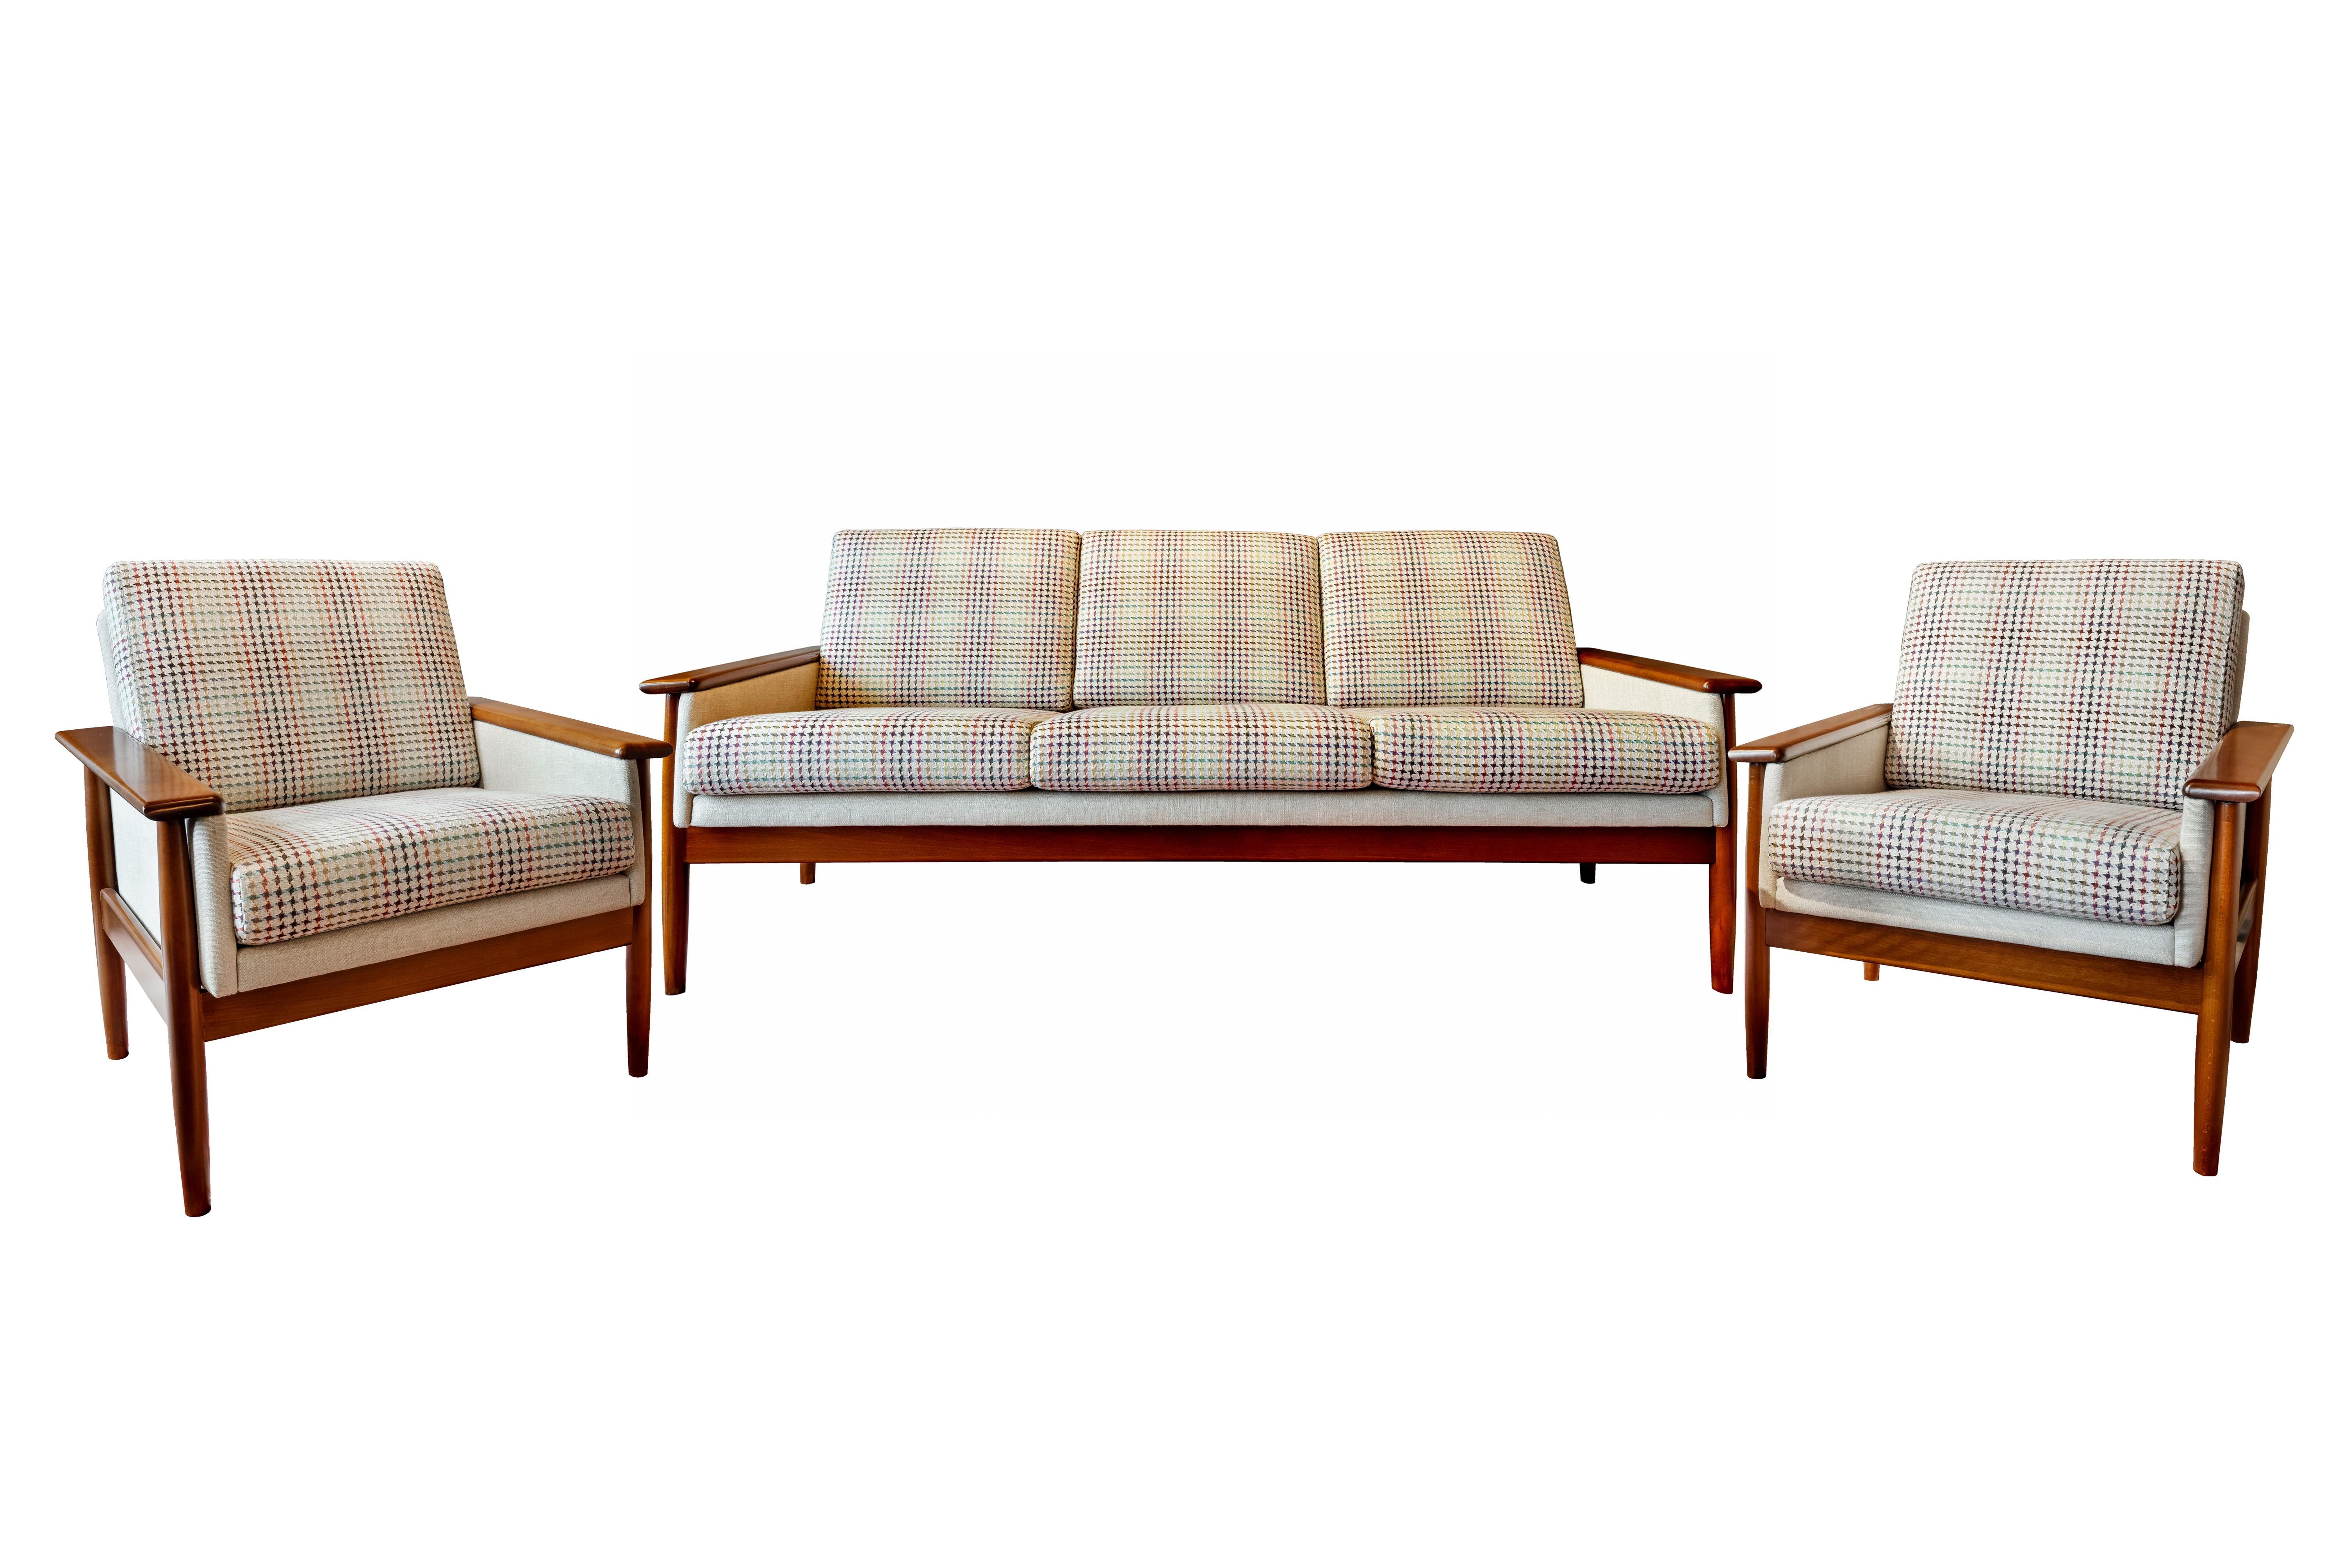  Mid-Century Modern Sofa Set 3 Seat and 2 Lounge Club Chairs Attr. to Knut Saete